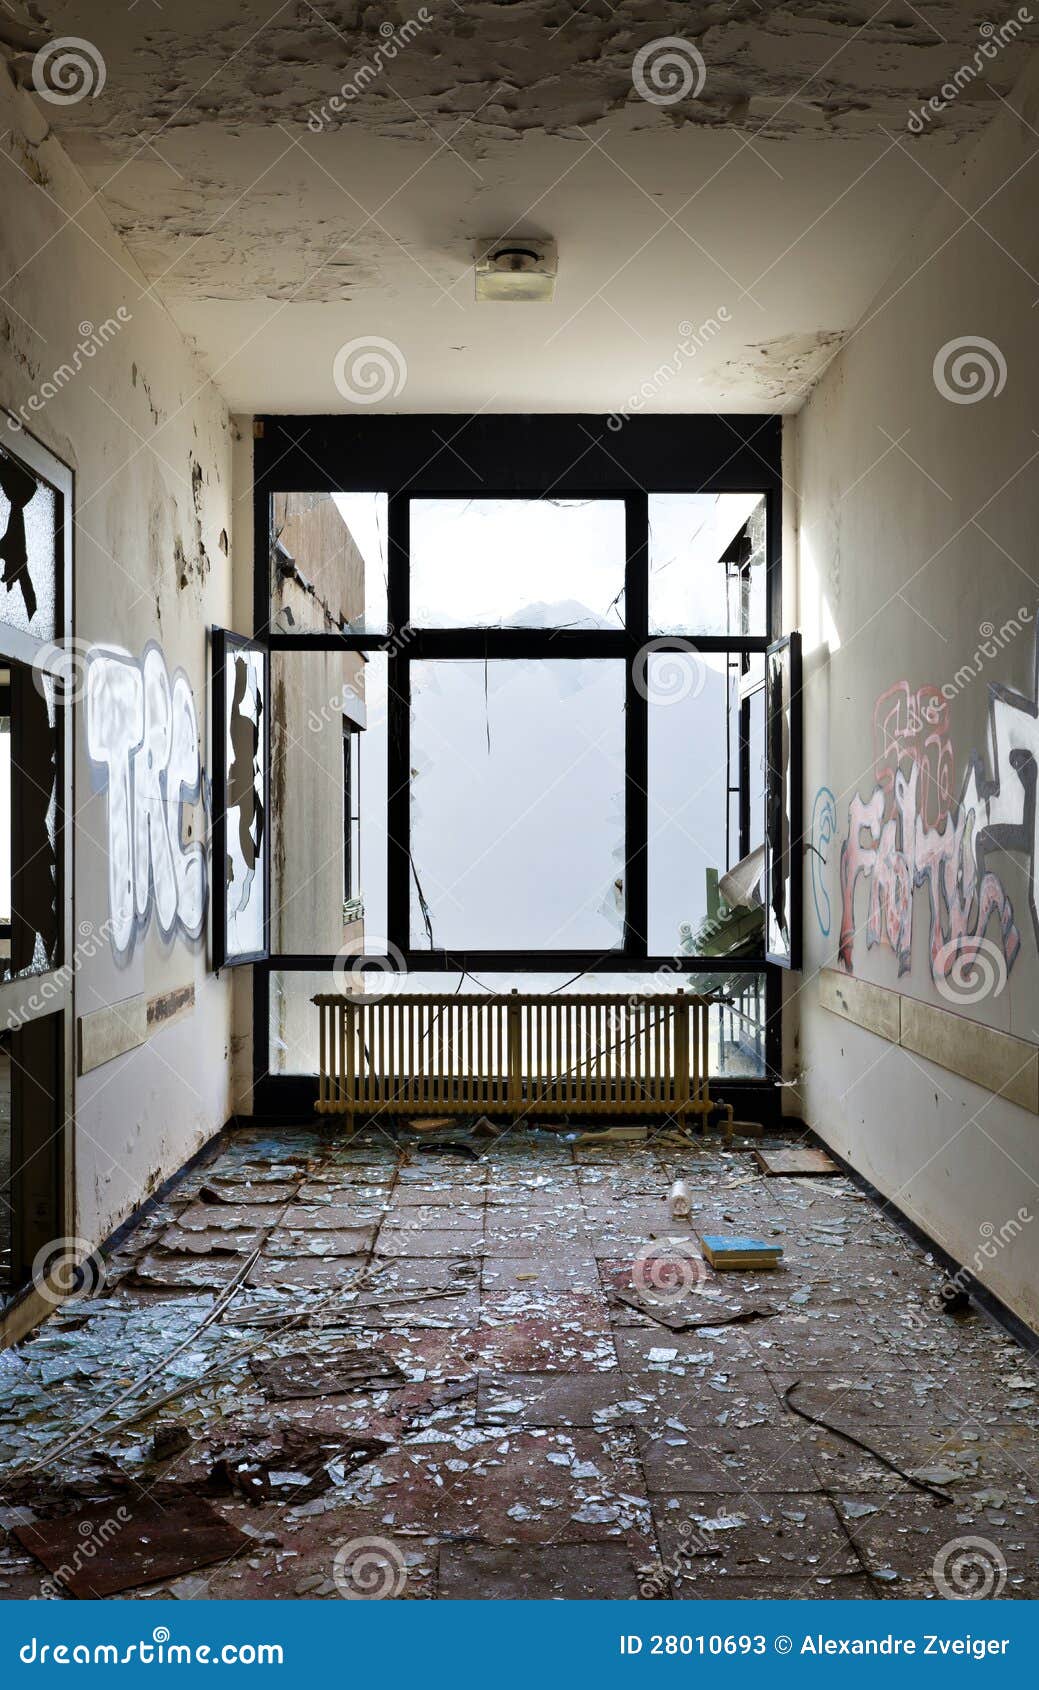 Abandoned building stock image. Image of floor, deserted - 28010693